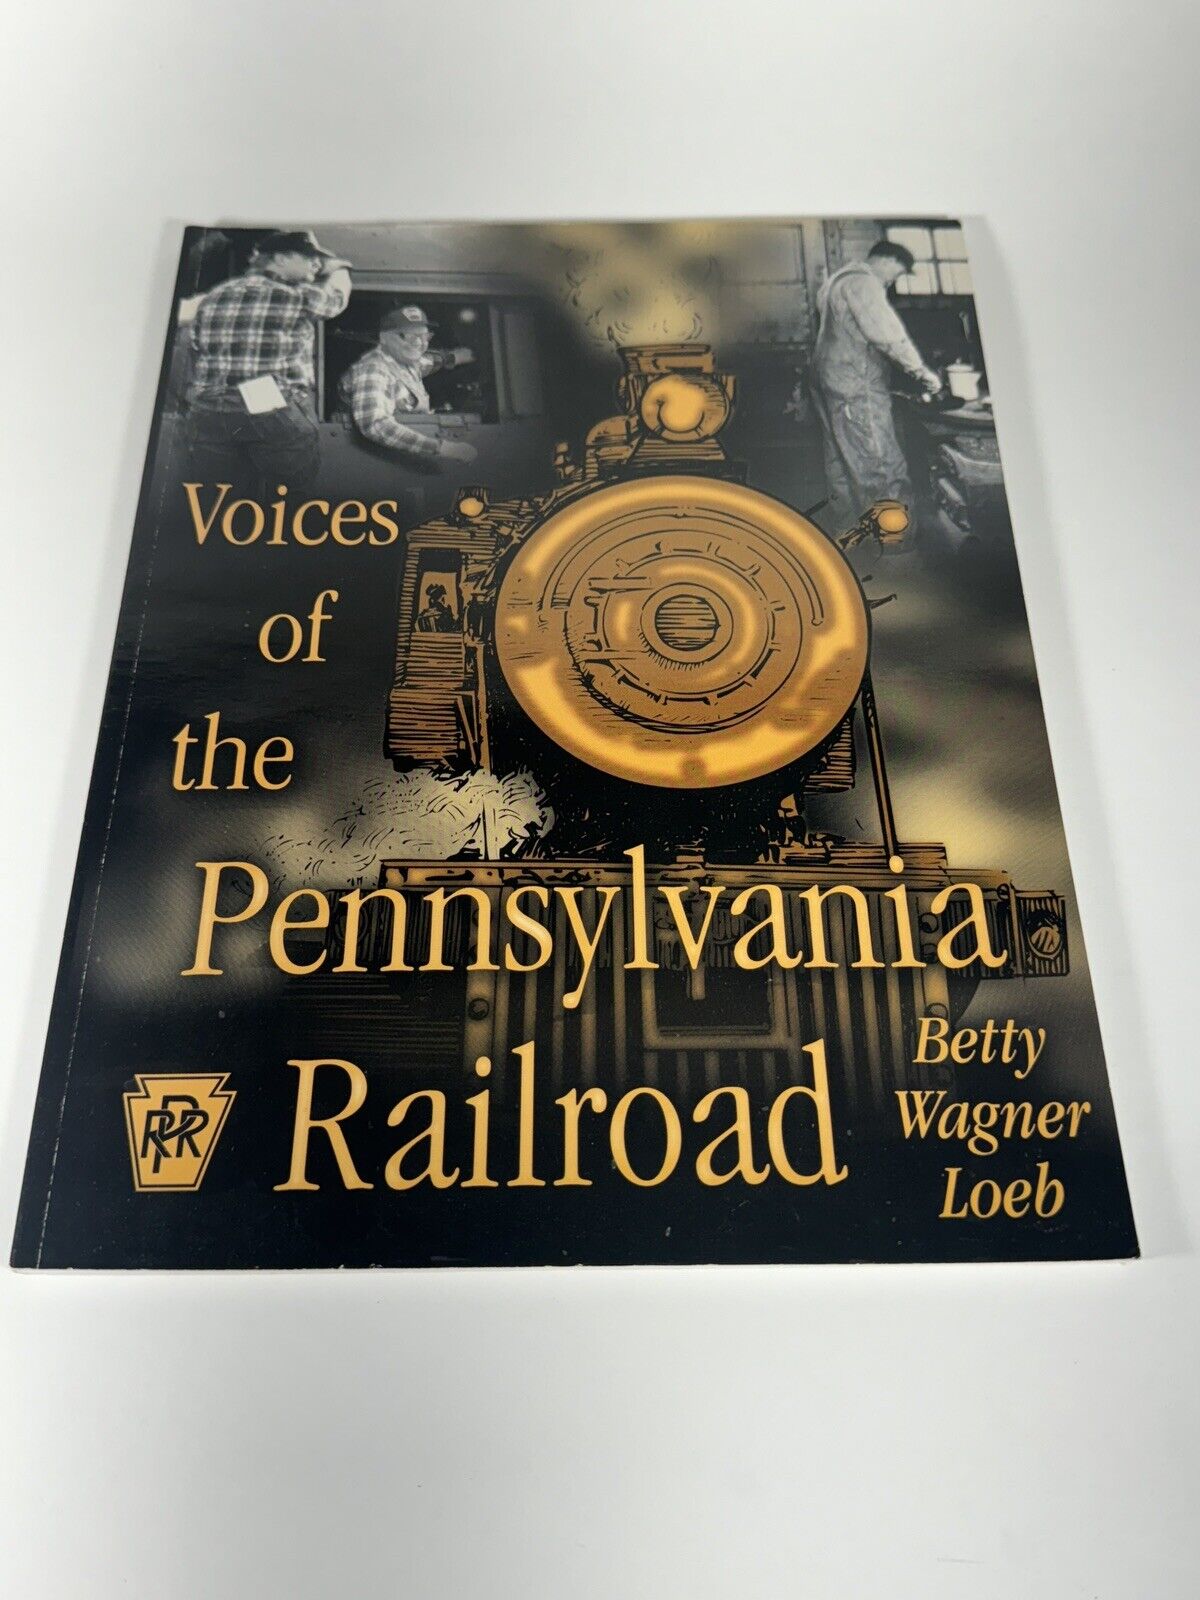 Voices of the PENNYSYLVANIA RAILROAD by Betty Wagner Loeb